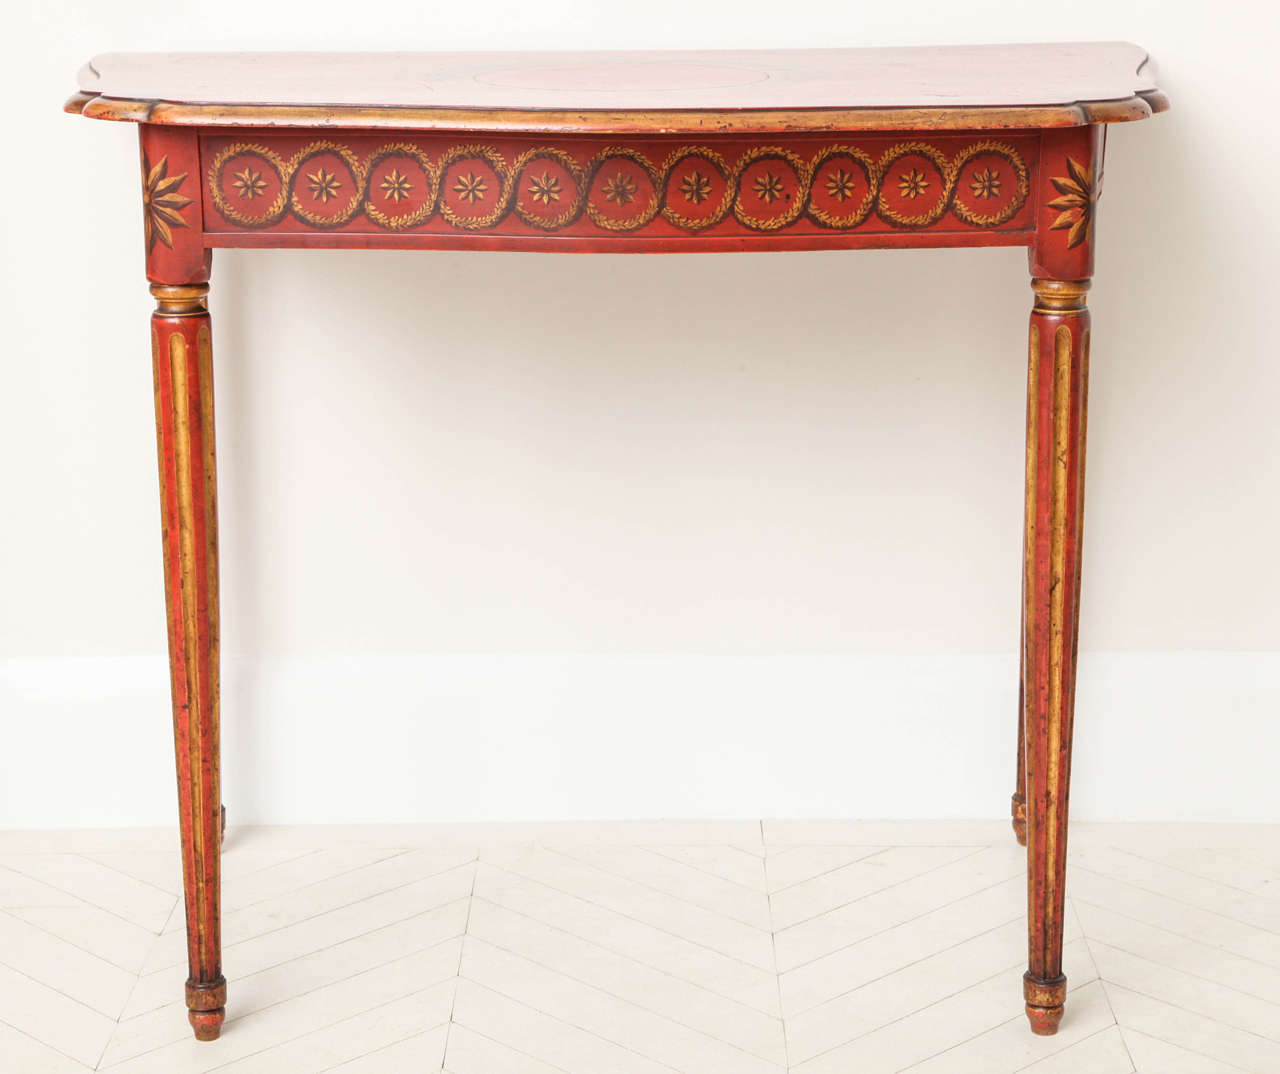 A 19th century Italian neoclassic polychrome and gilt-painted console table with shaped top, decorated frieze and stop-fluted legs, circa 1880.